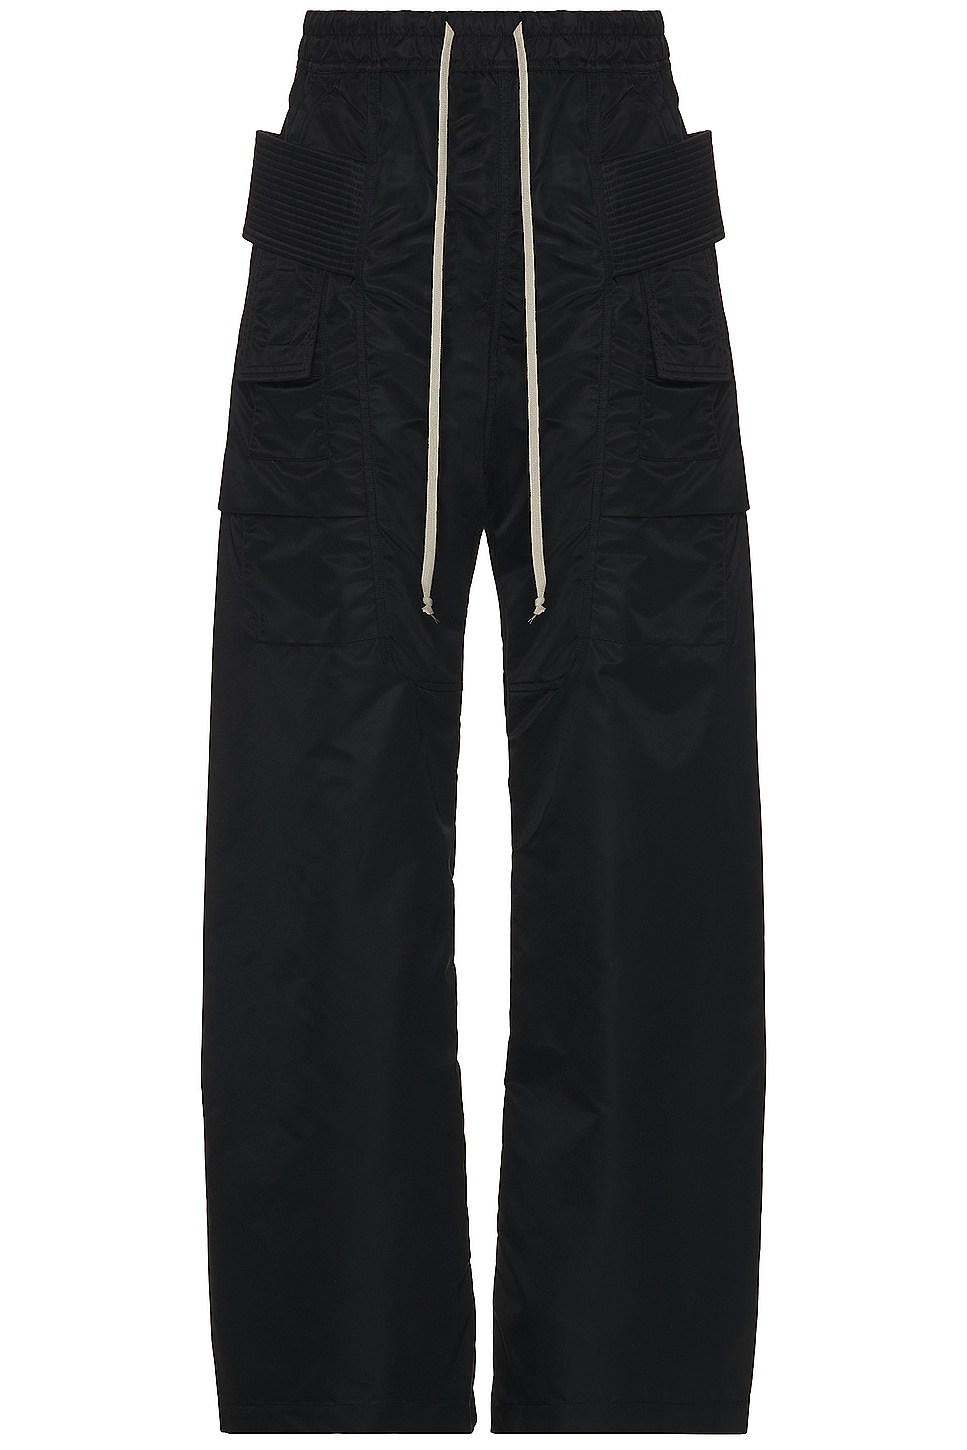 Creatch Cargo Wide Pant in Black